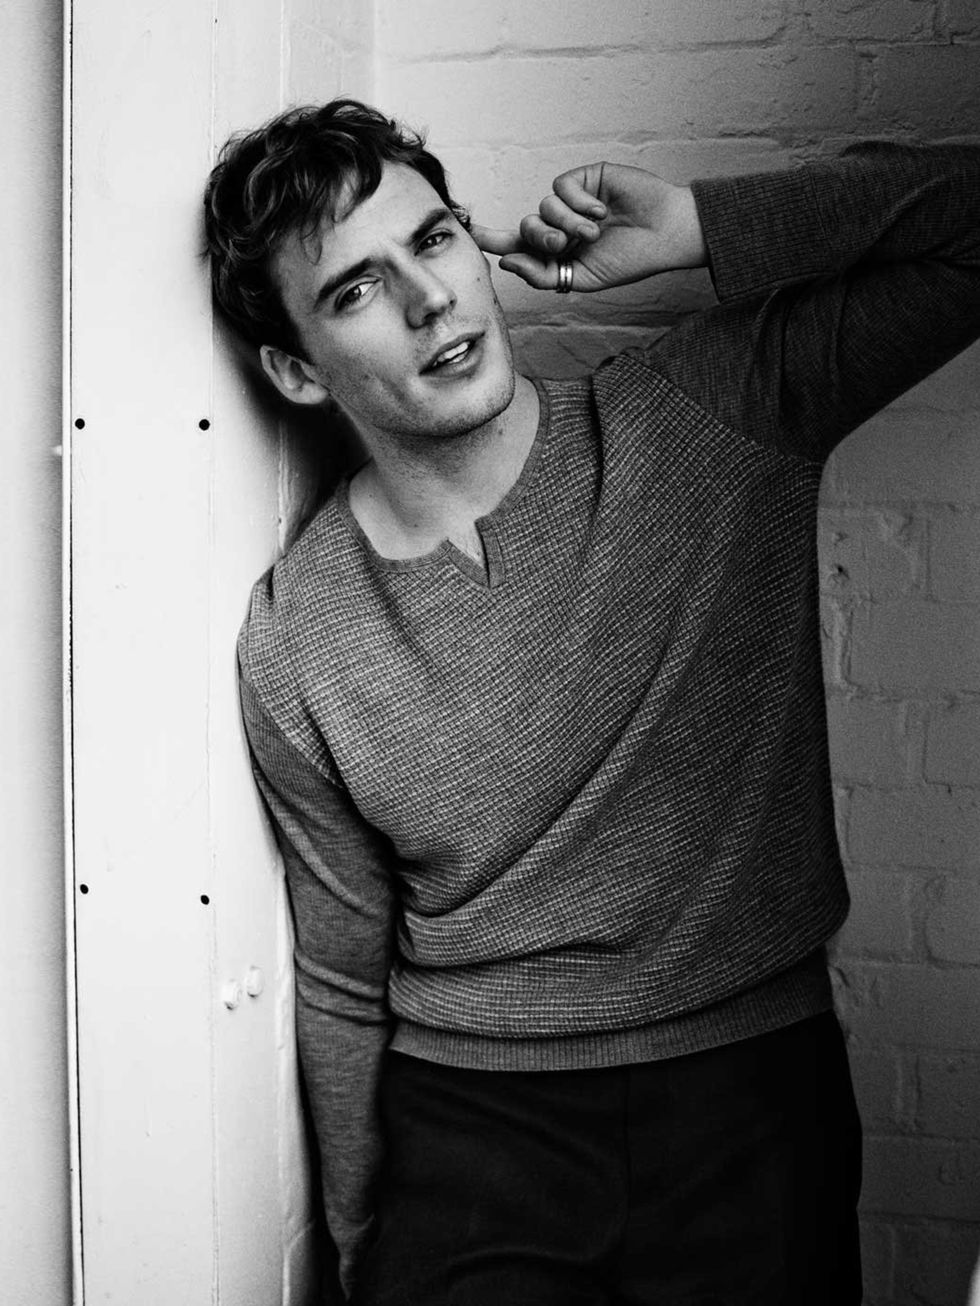 <p>Sam Claflin bringing that broody hotness in the November issue of ELLE.</p>